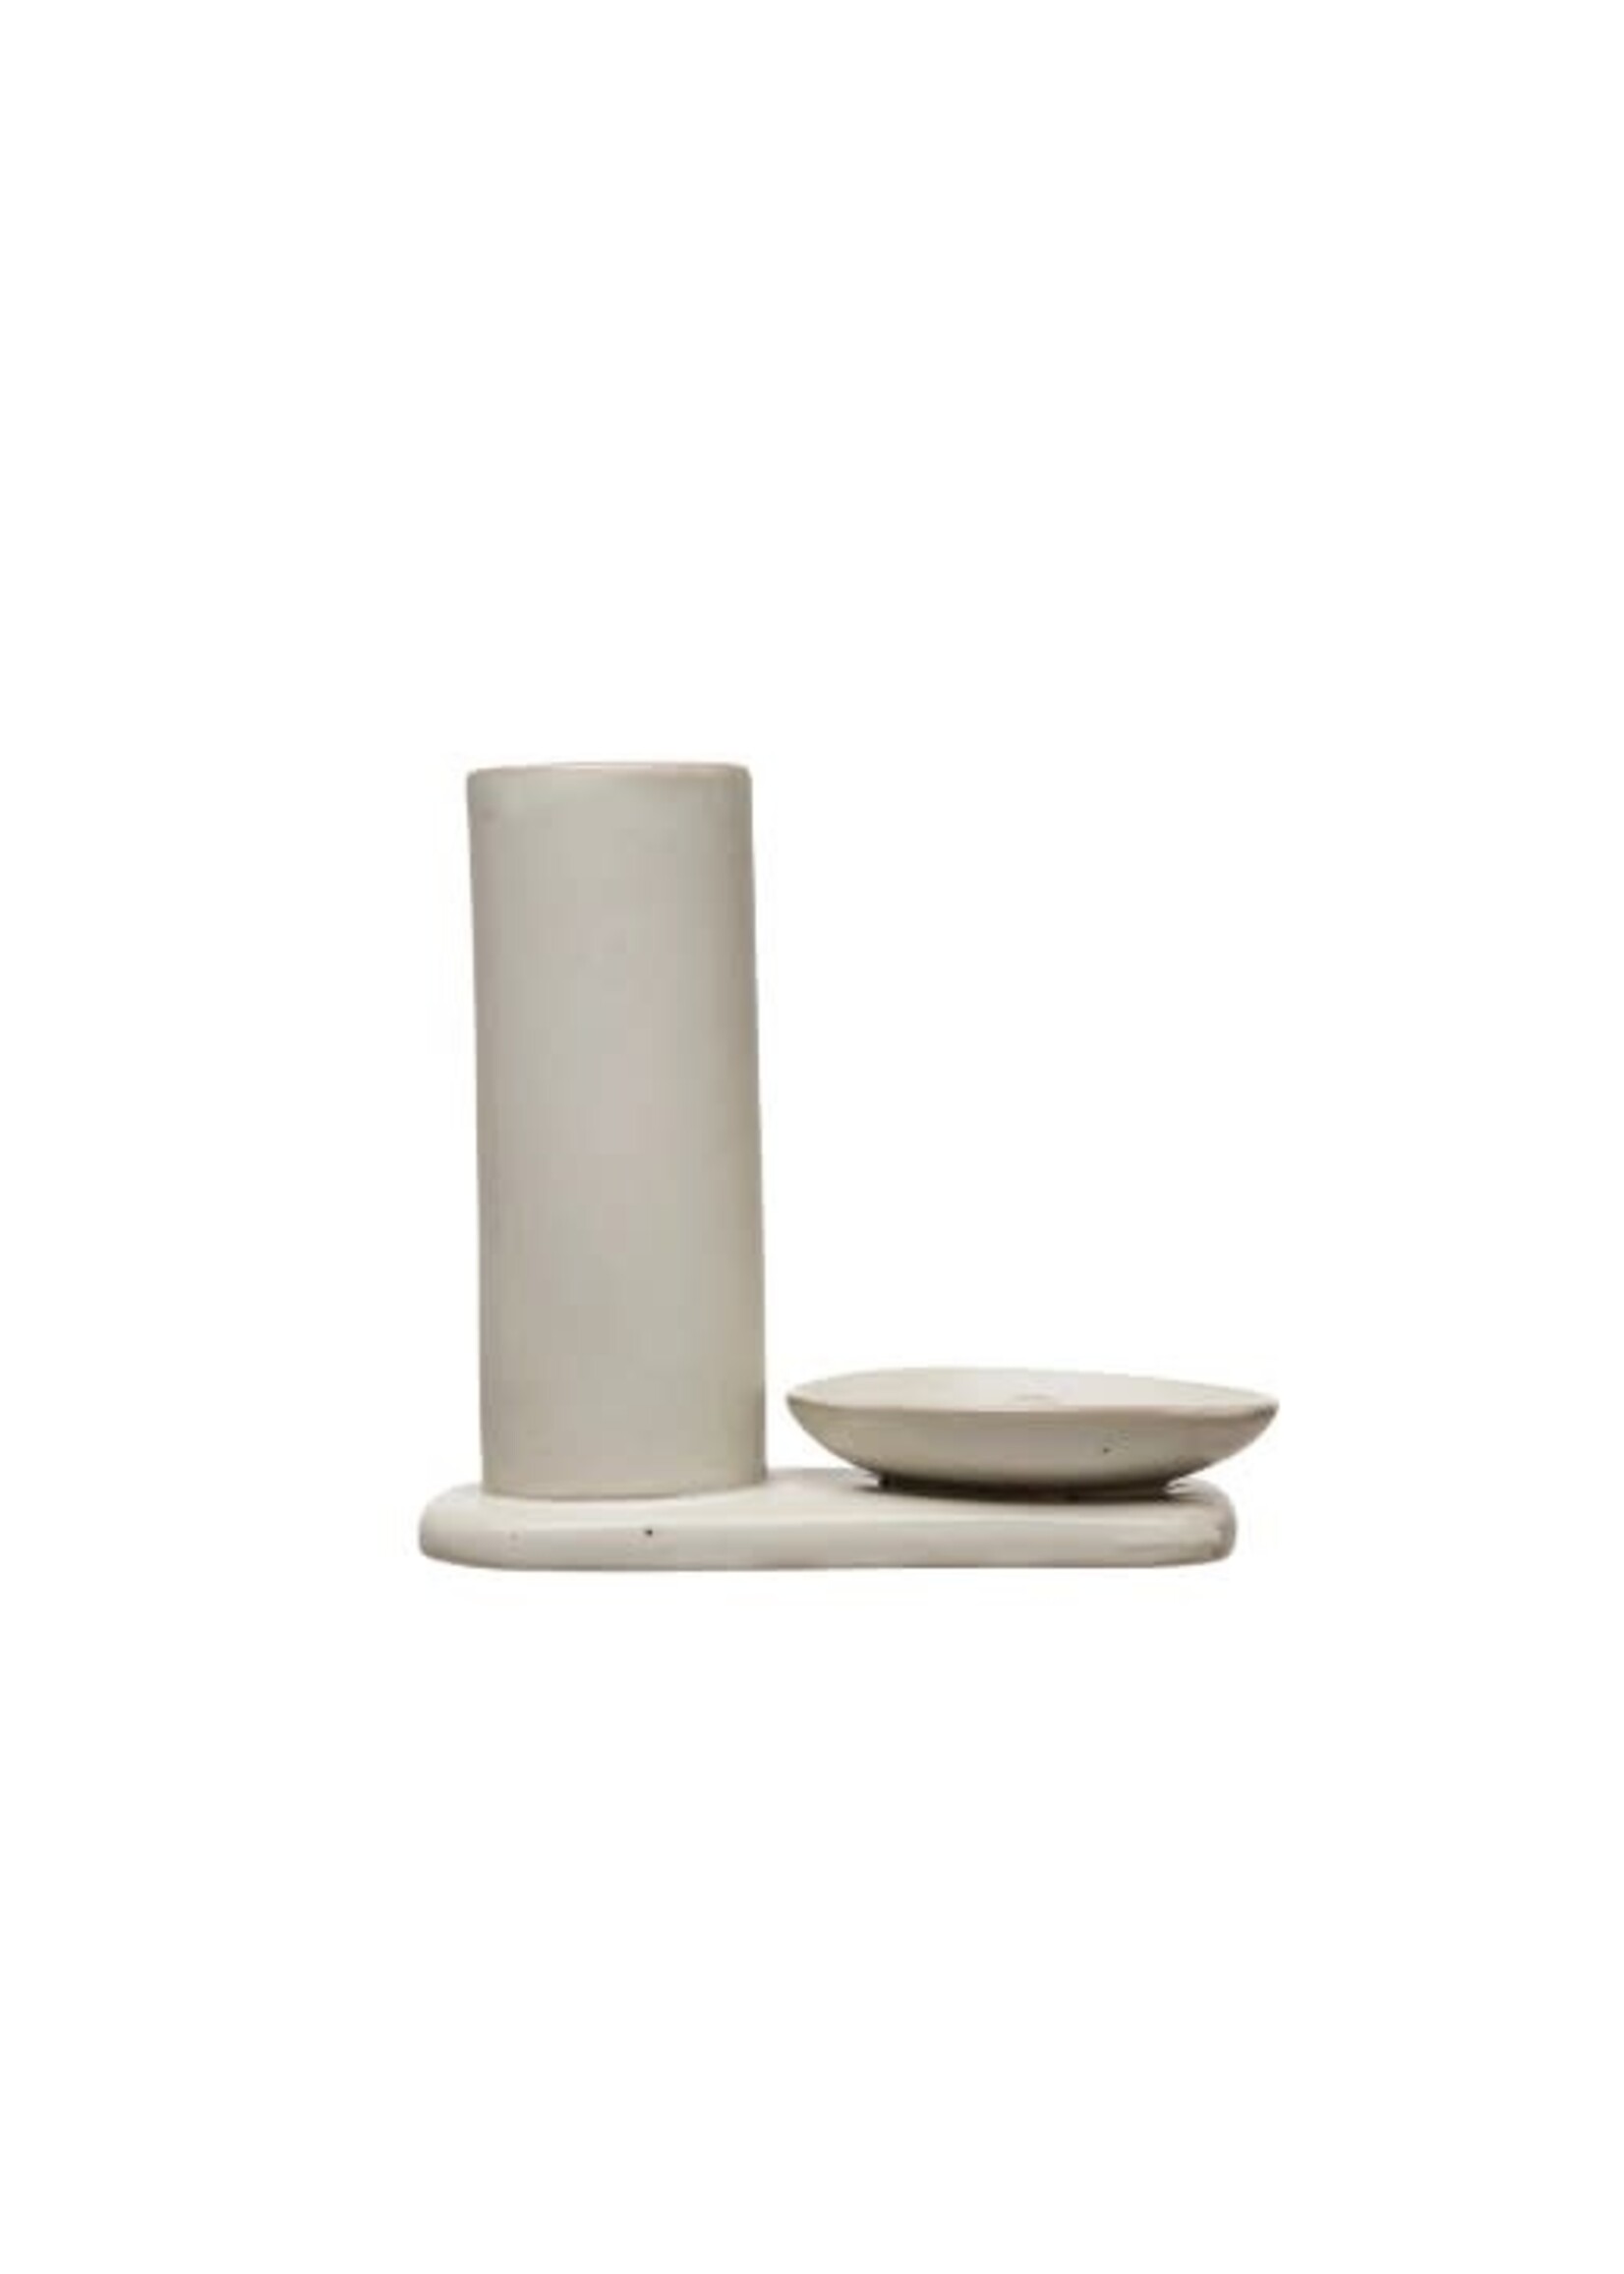 Incense Dish/Holder (2-in-one)